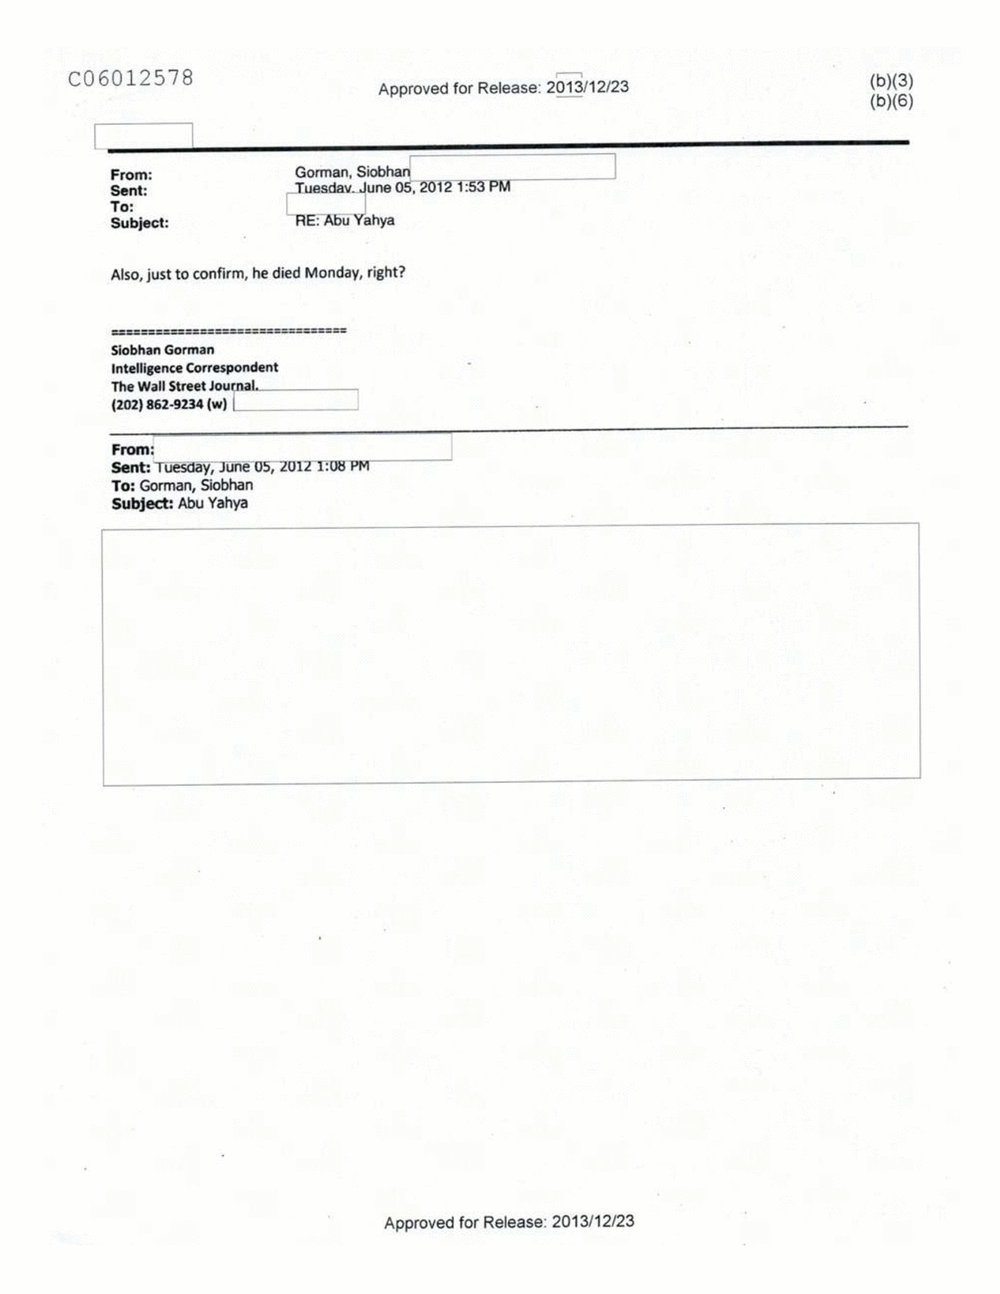 Page 114 from Email Correspondence Between Reporters and CIA Flacks